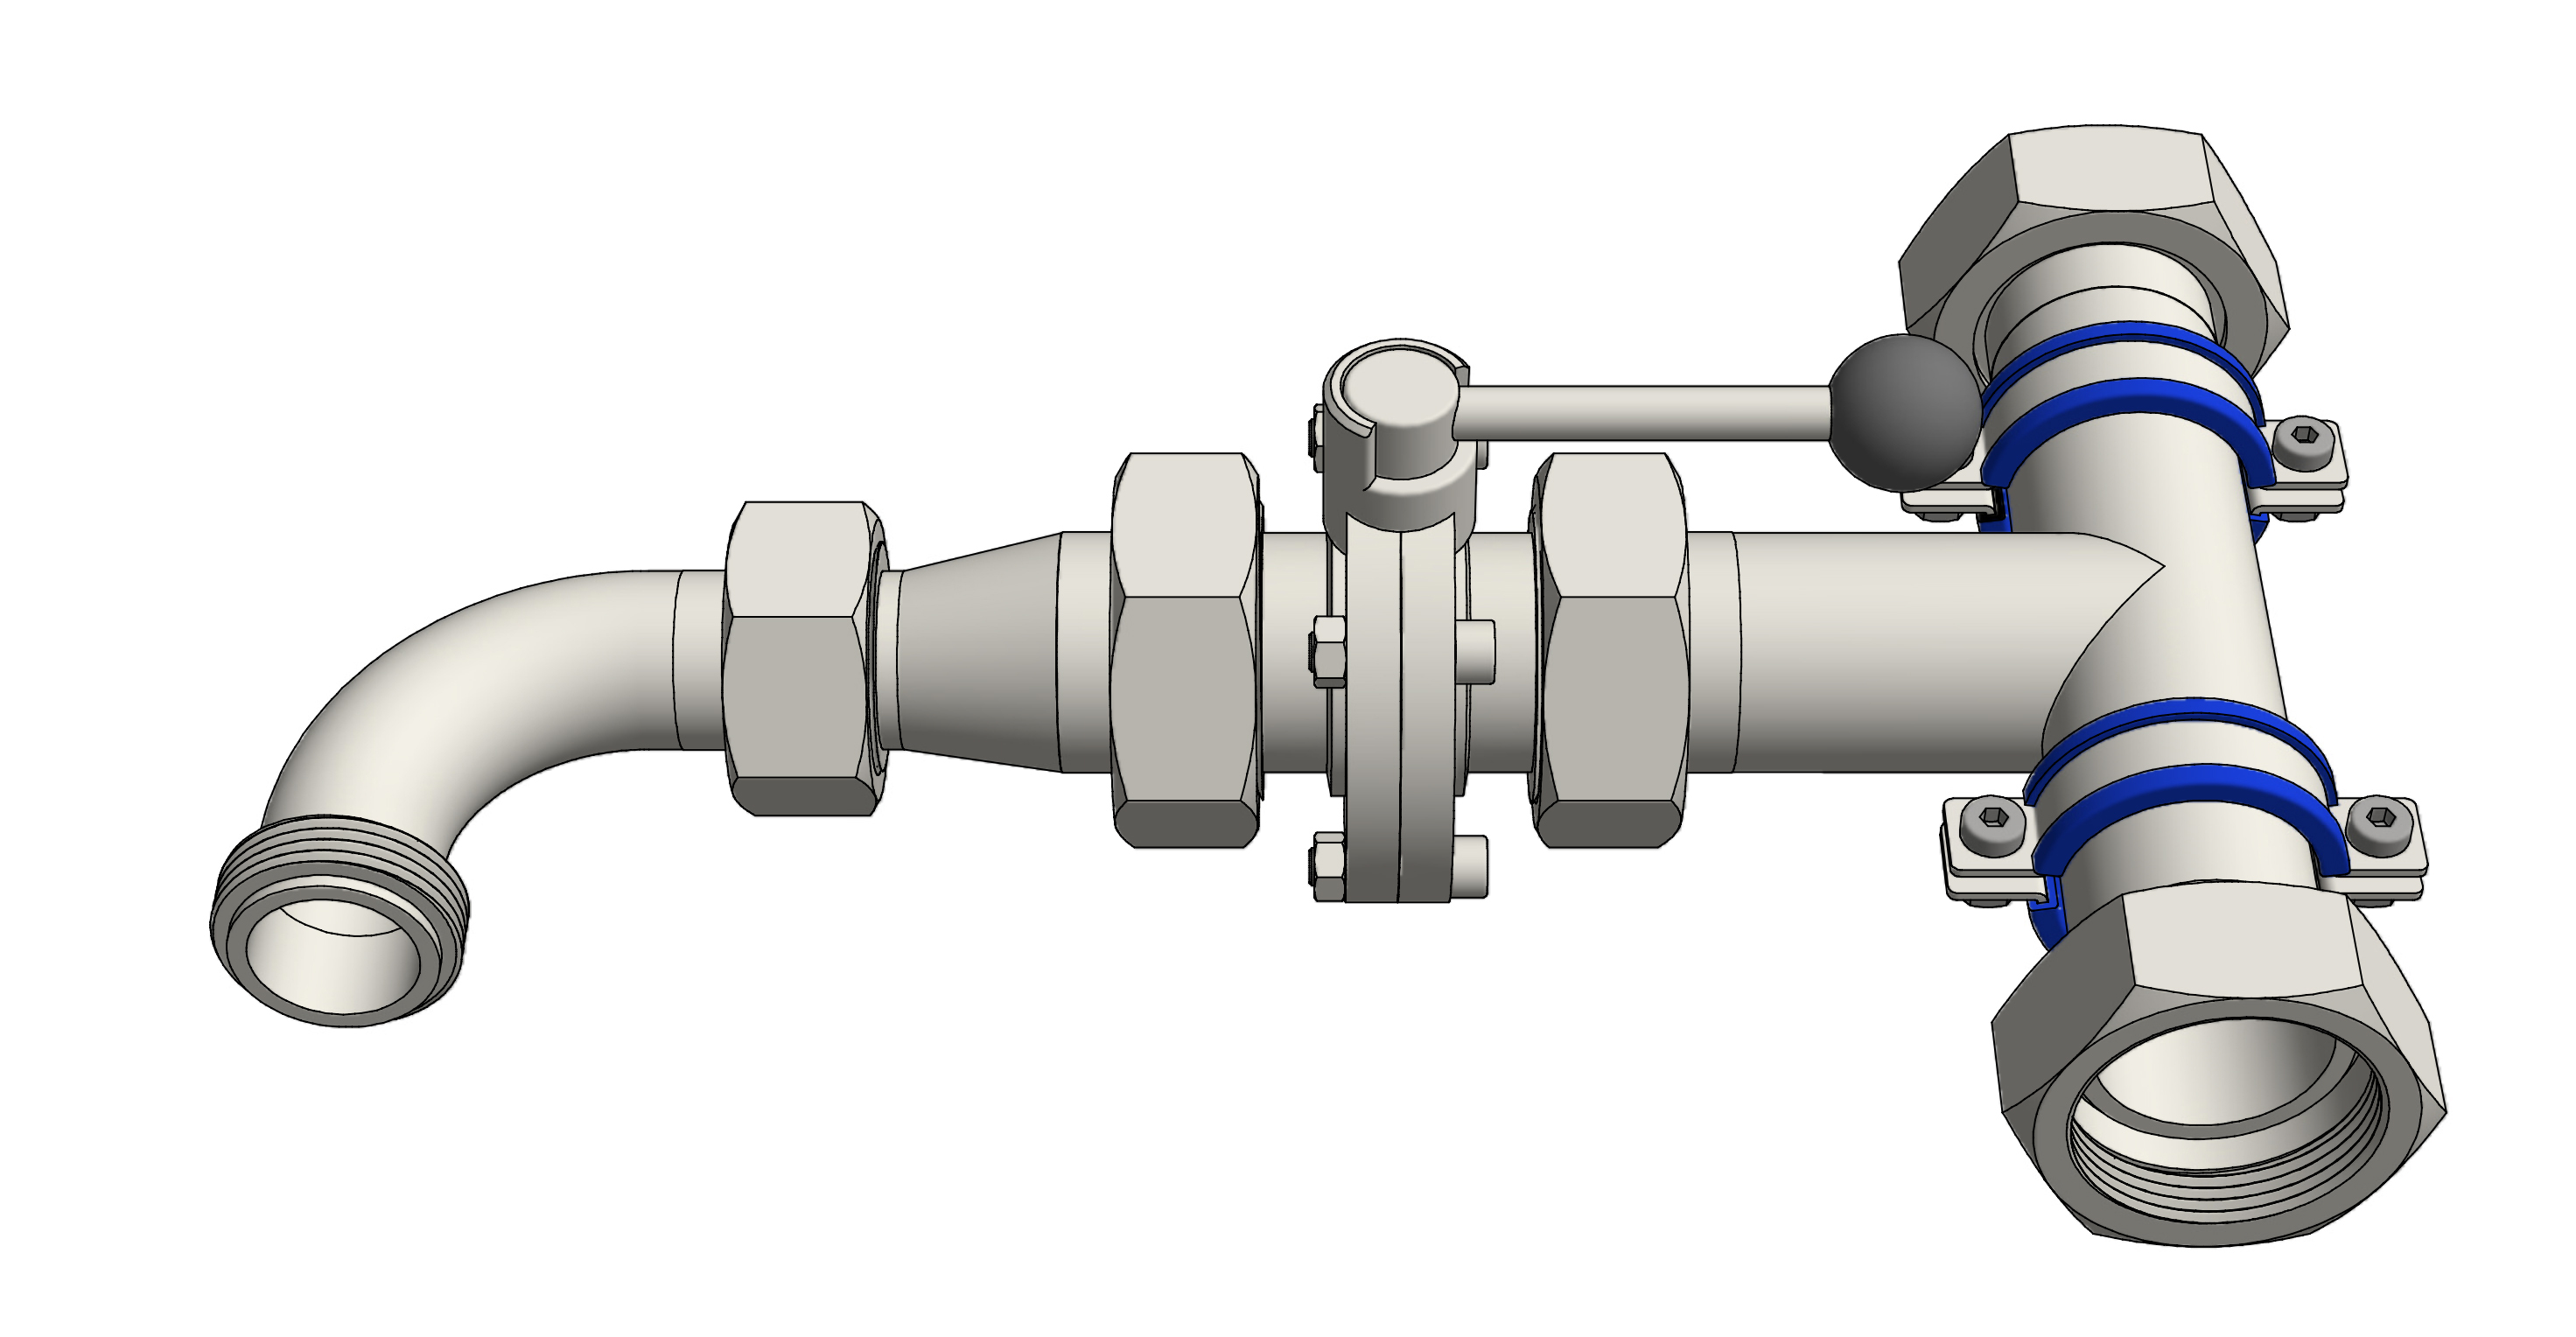 IDF_Union_Fittings_Assembled_drawing_3D_CAD_Files-1A